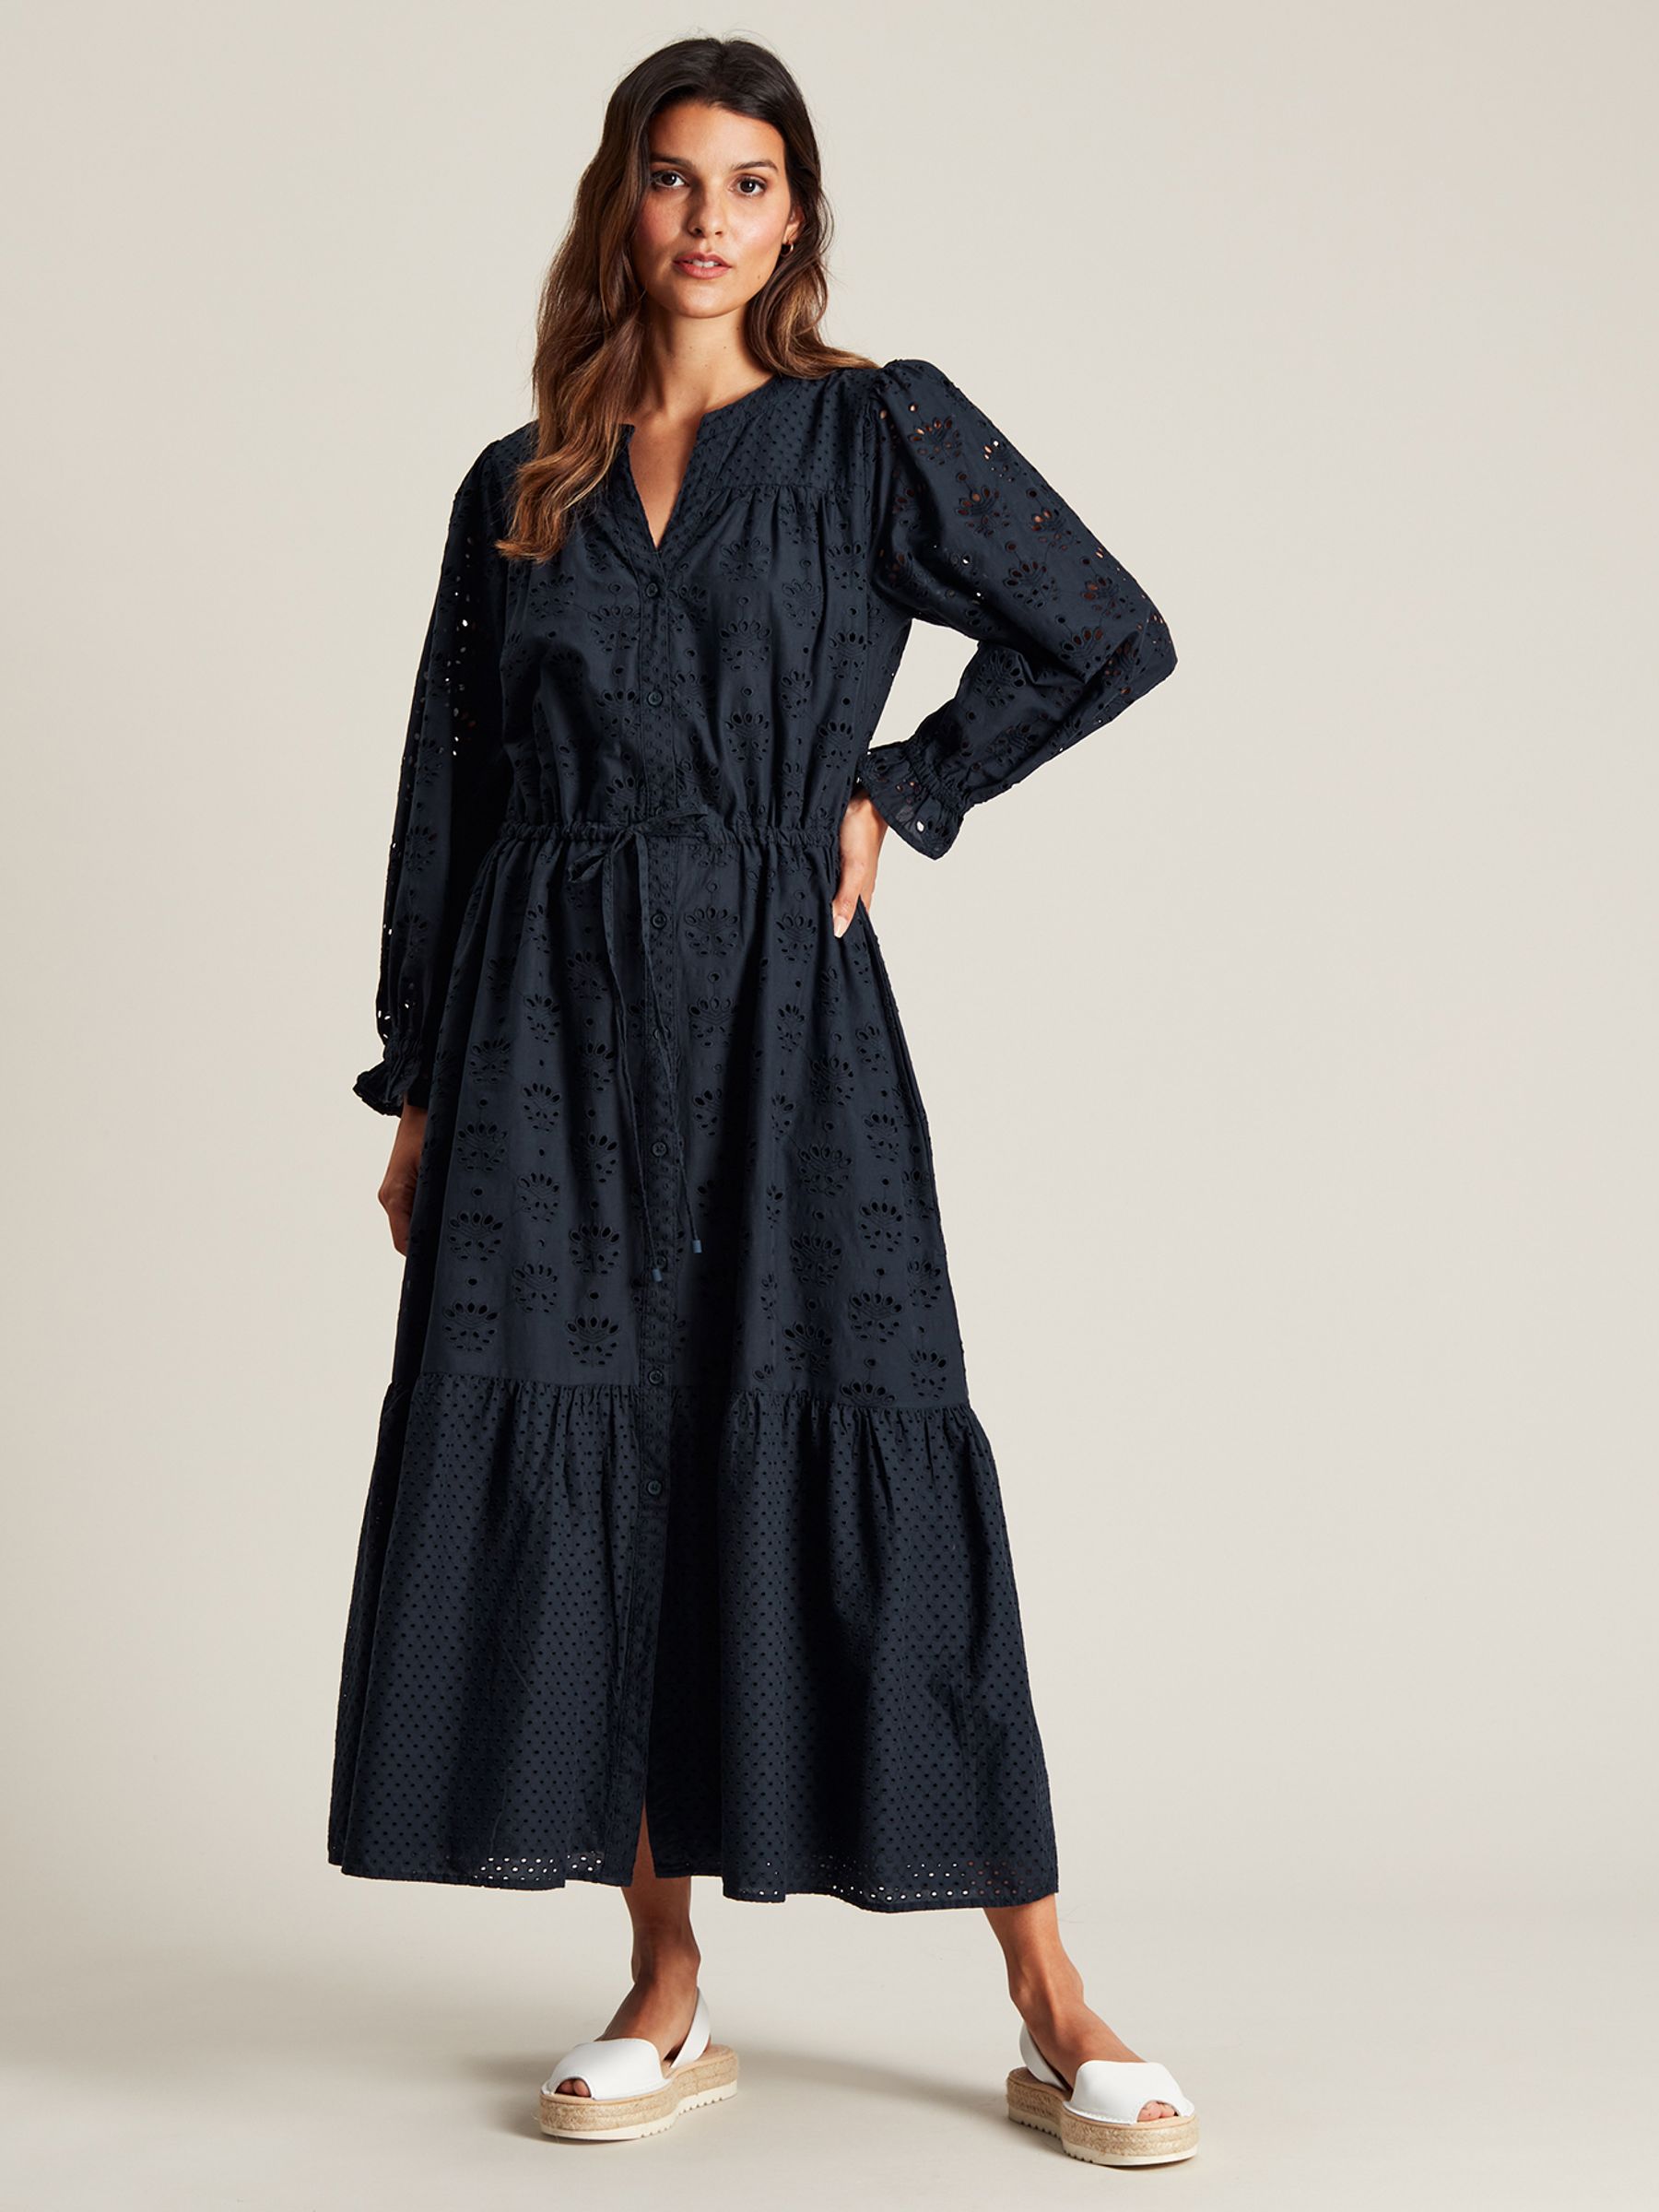 Buy Joules Juliana Broderie Dress from the Joules online shop